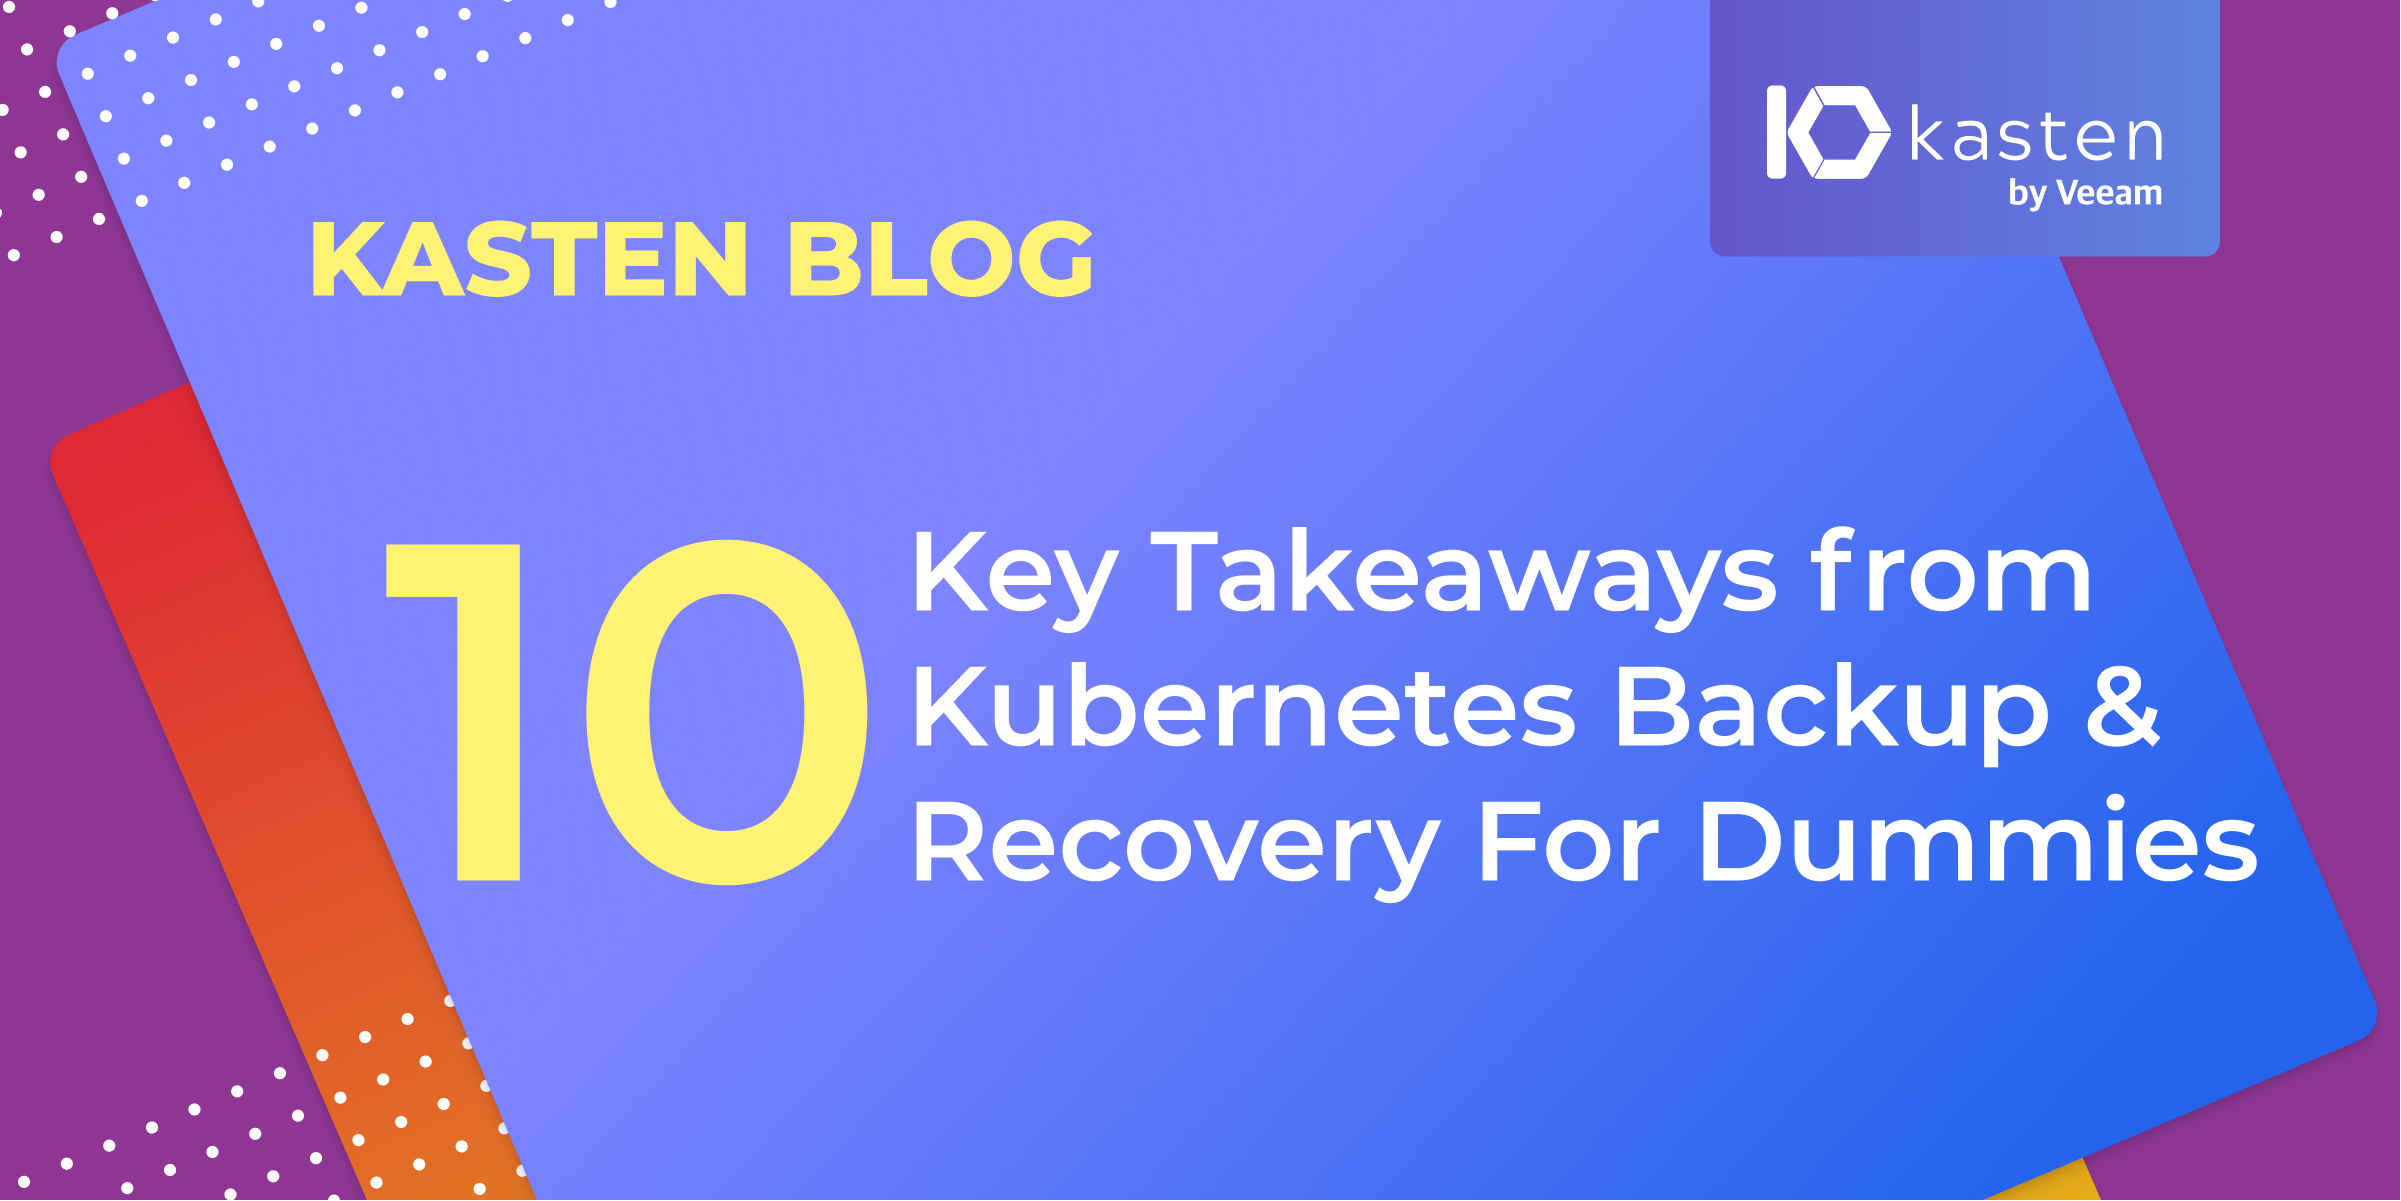 Kubernetes Backup & Recovery For Dummies